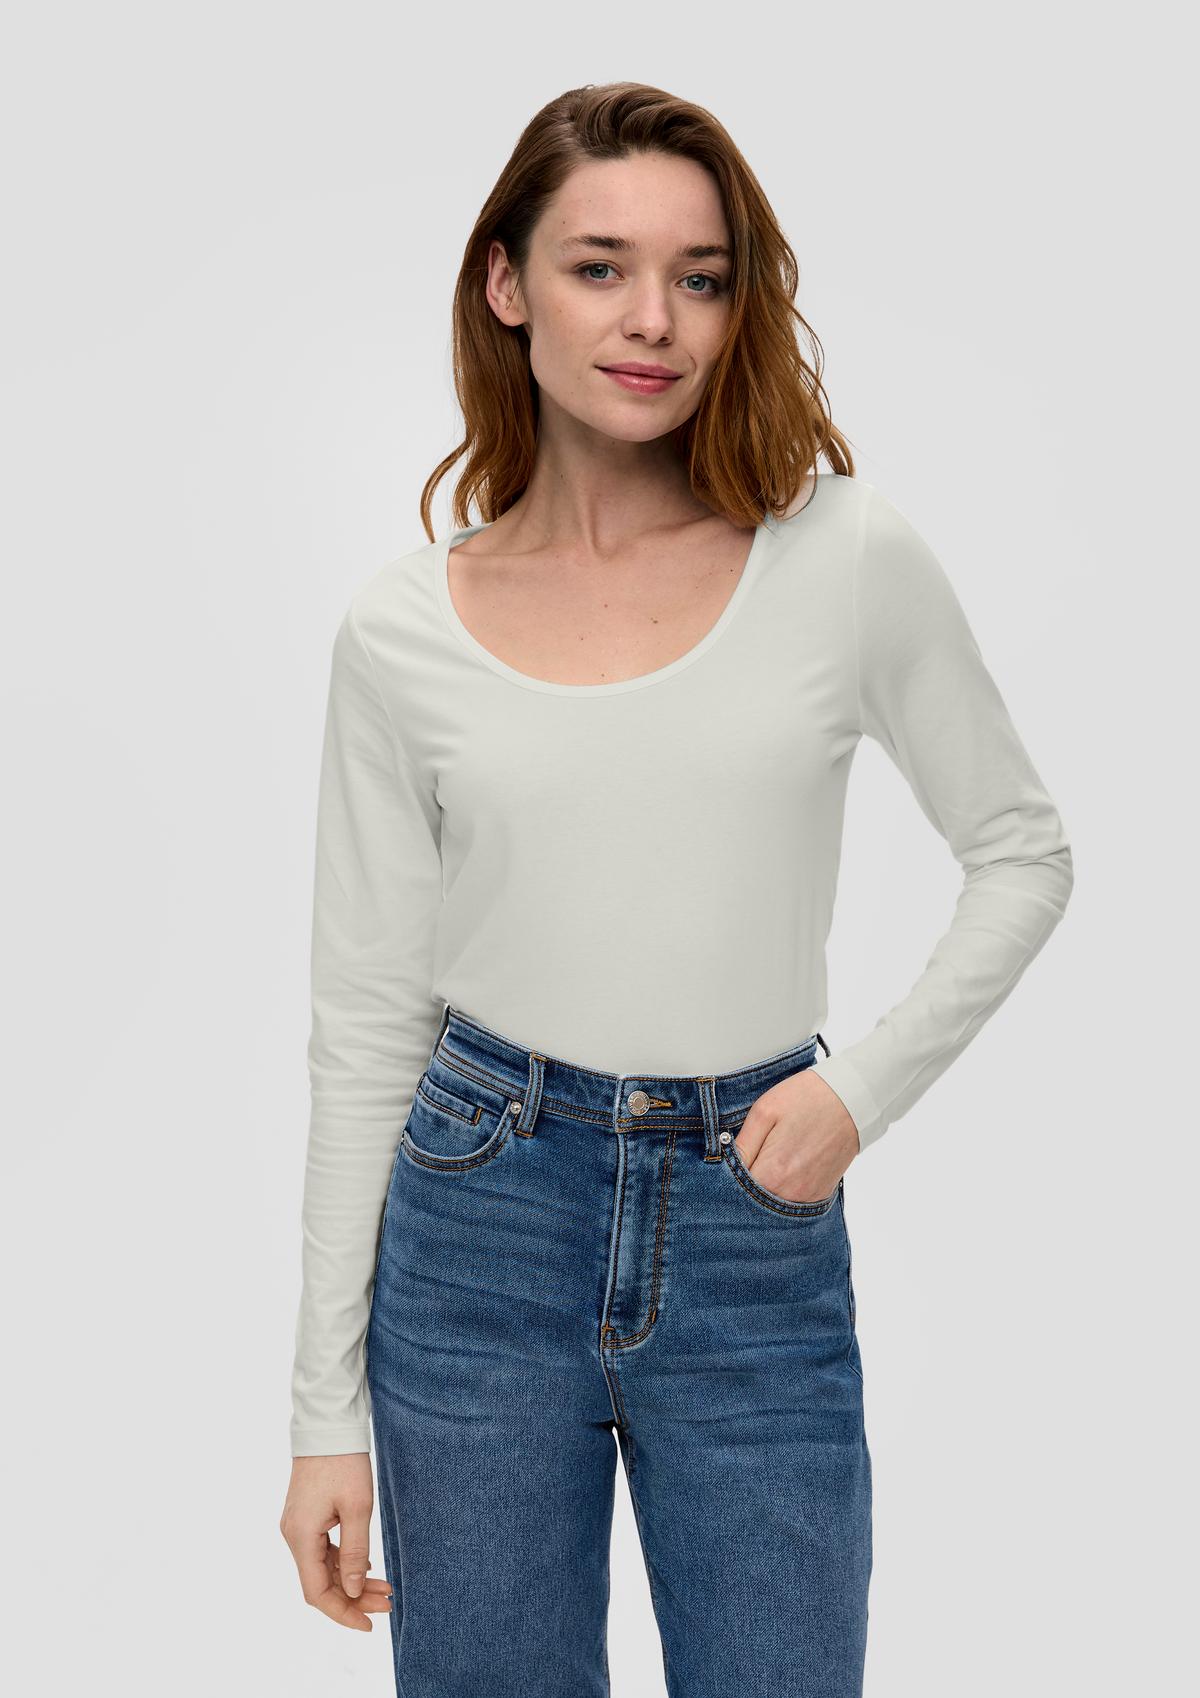 s.Oliver Long sleeve top with a low round neckline